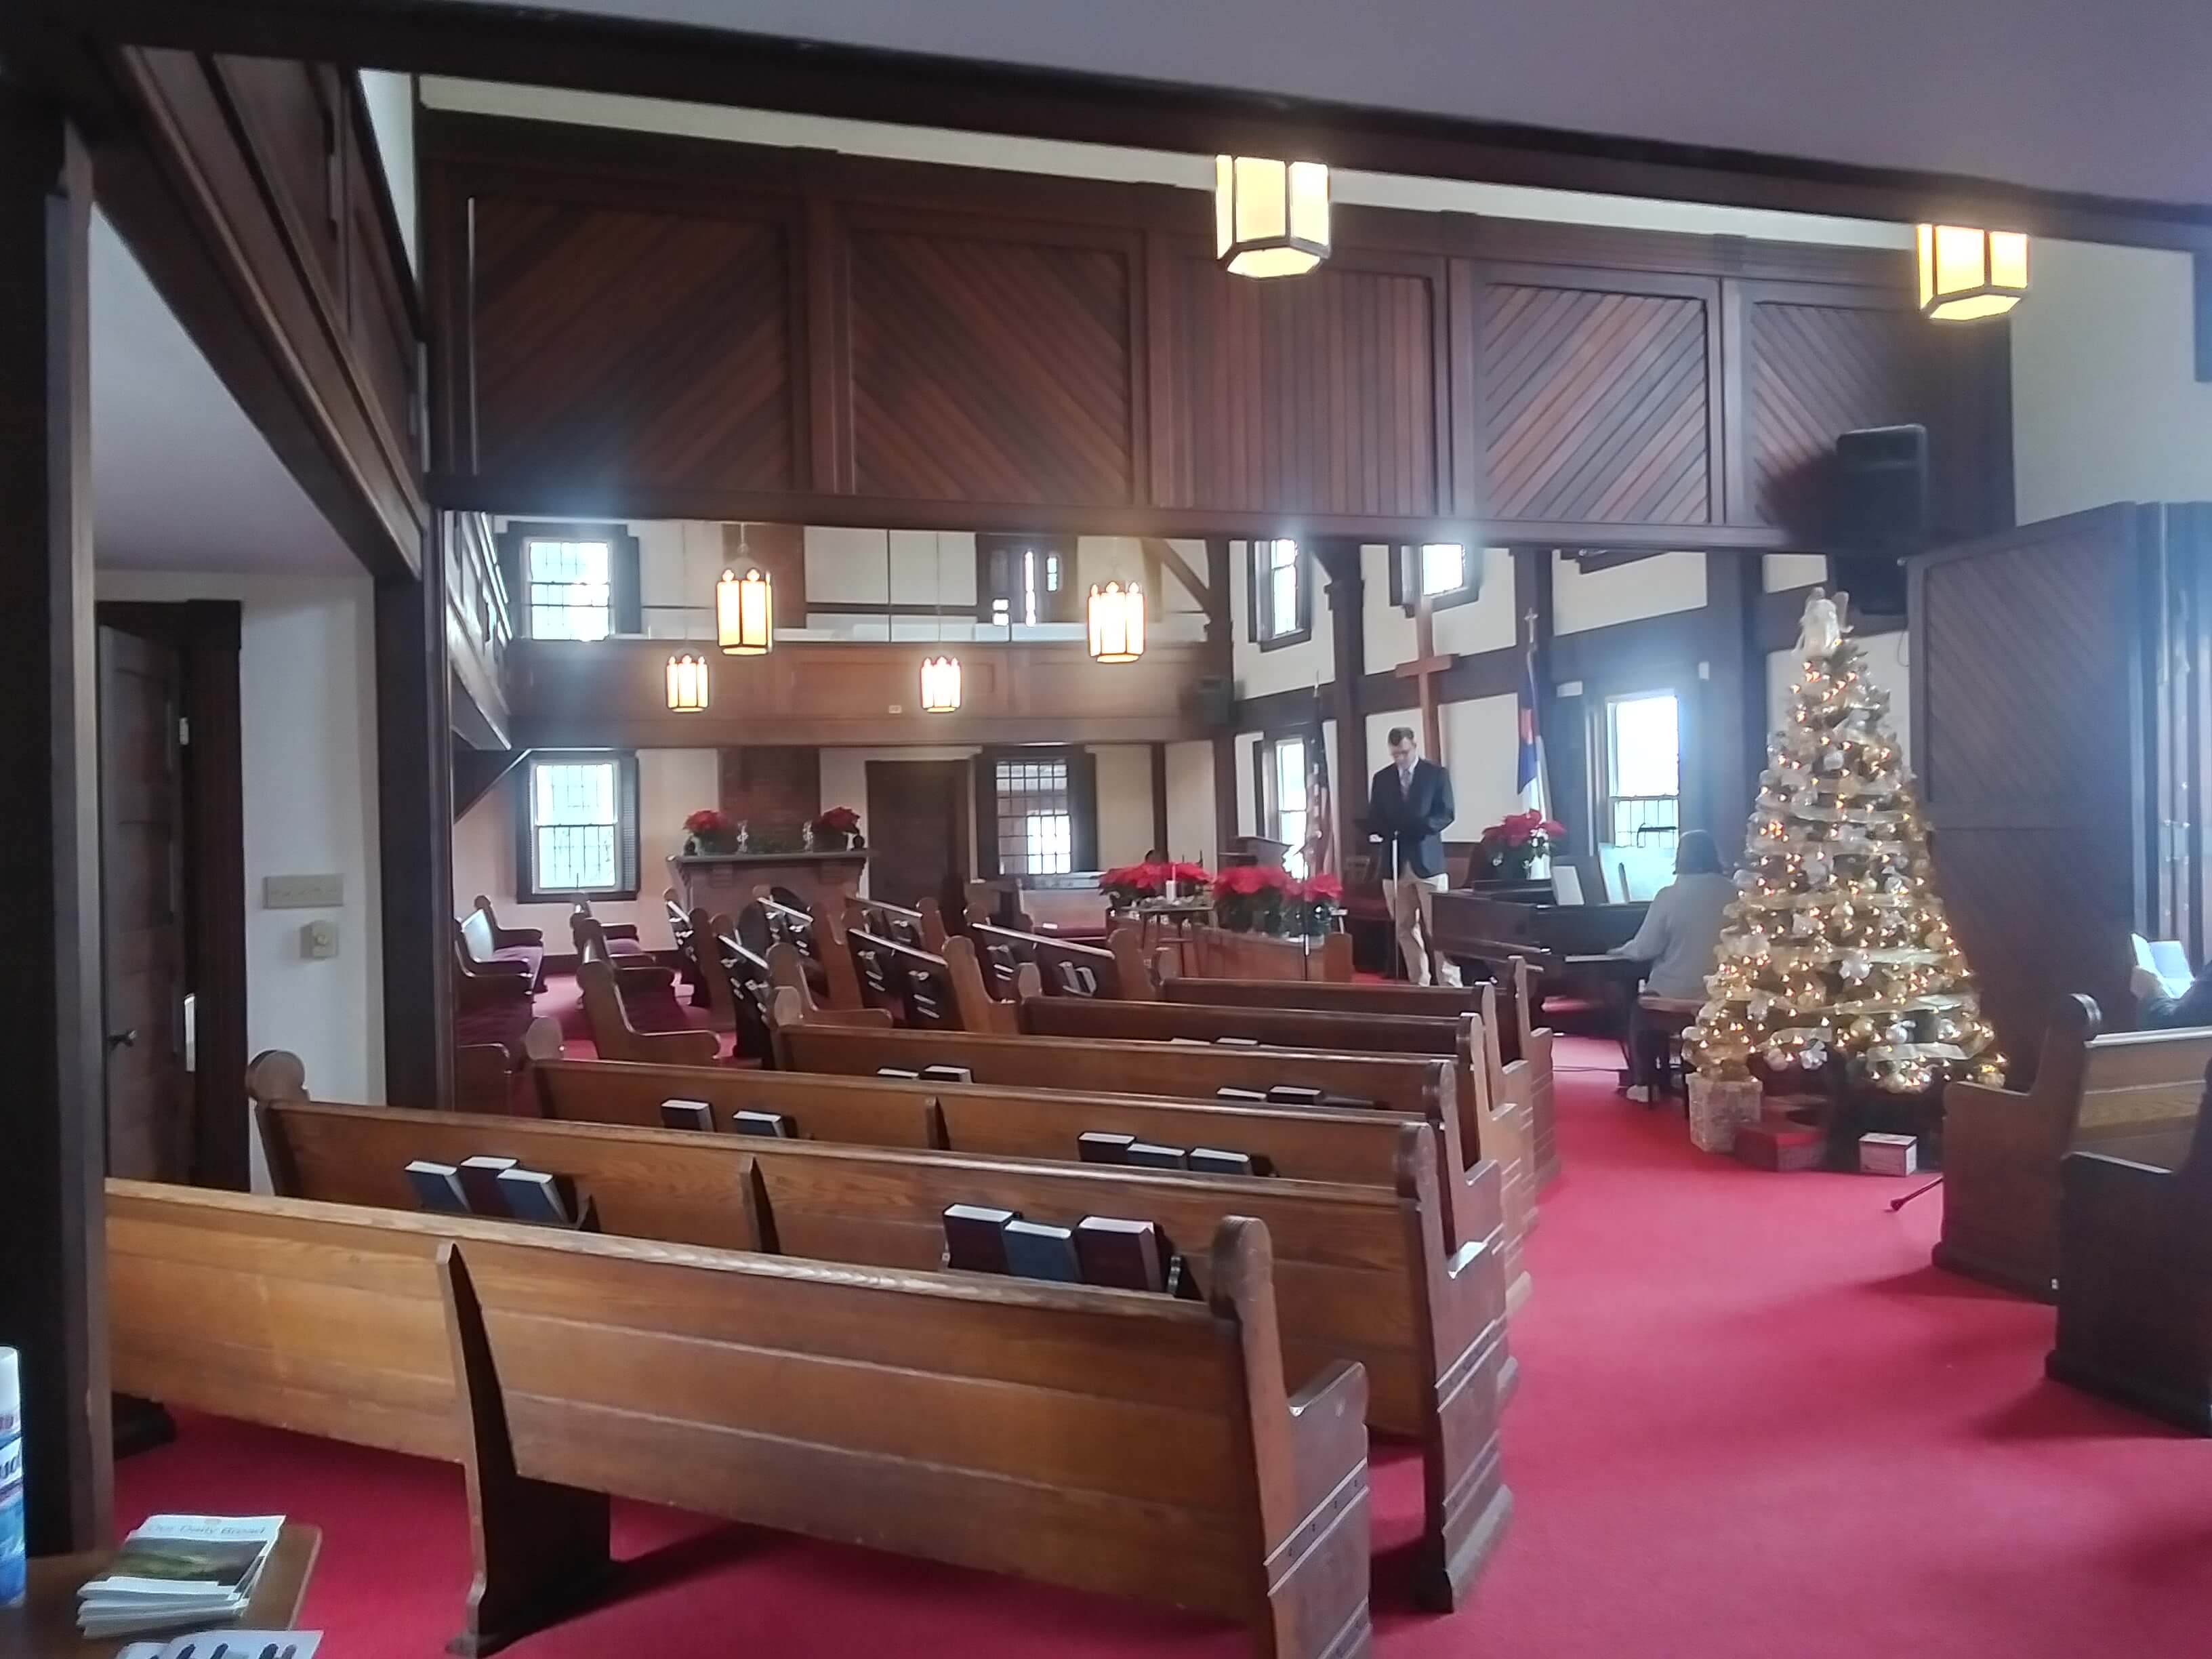 sanctuary decorated fo Christmas